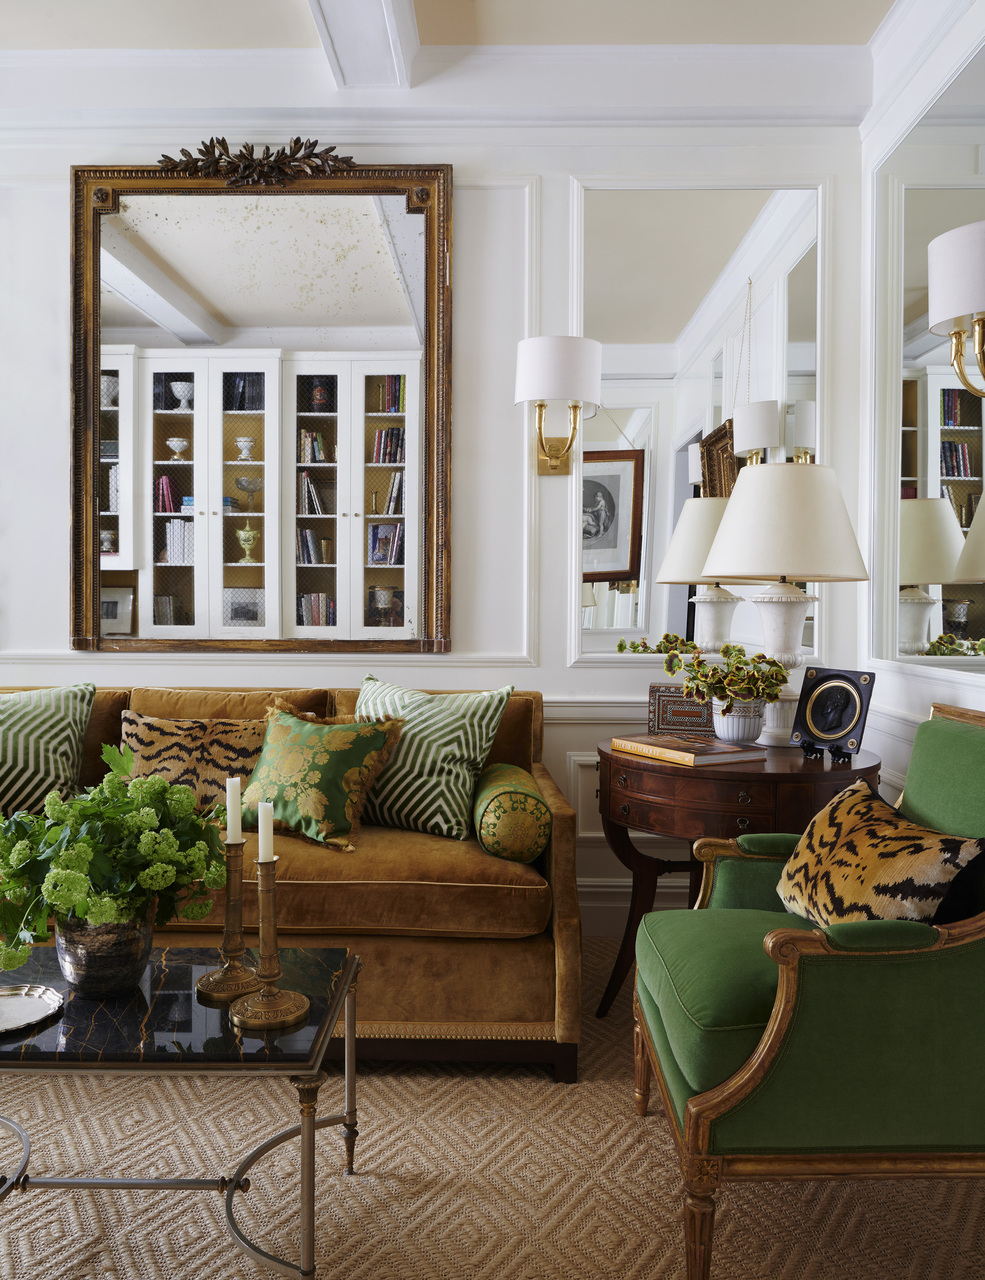 New York City home interior design by Marshall Watson and Reid Deane Ganes